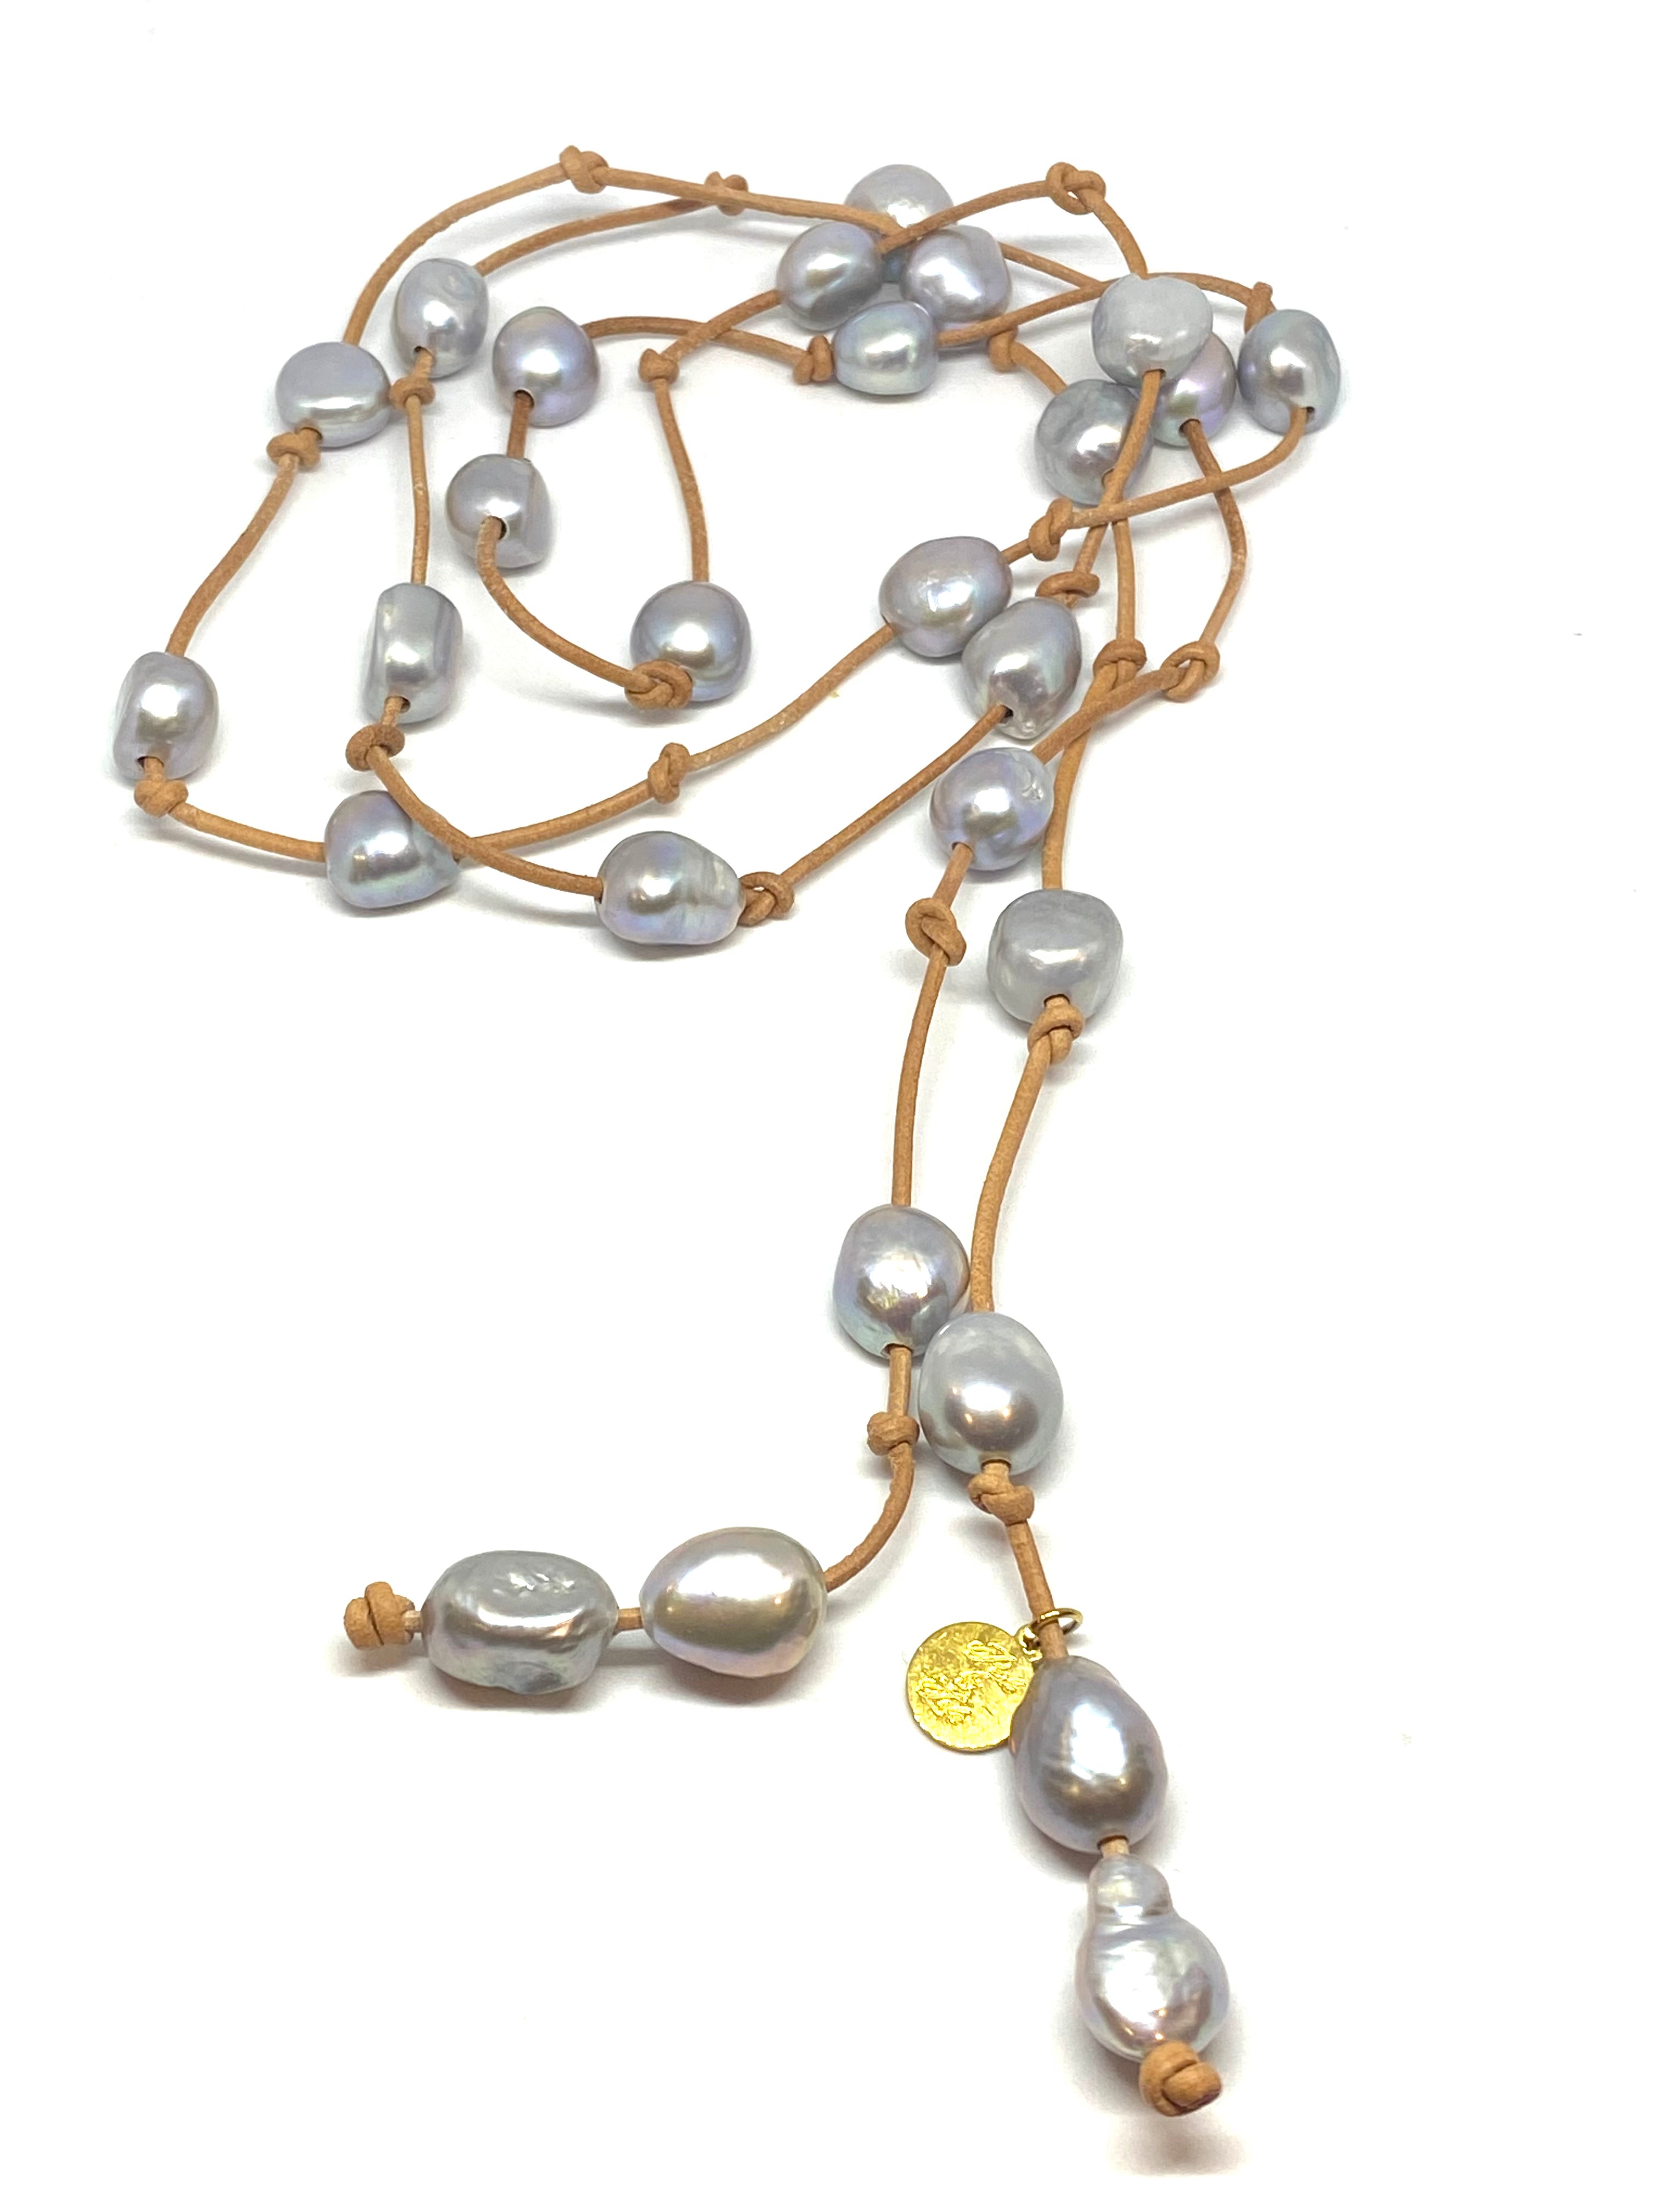 Perle by Lola pearl lariat with grey pearls found at patricia in southern pines, nc